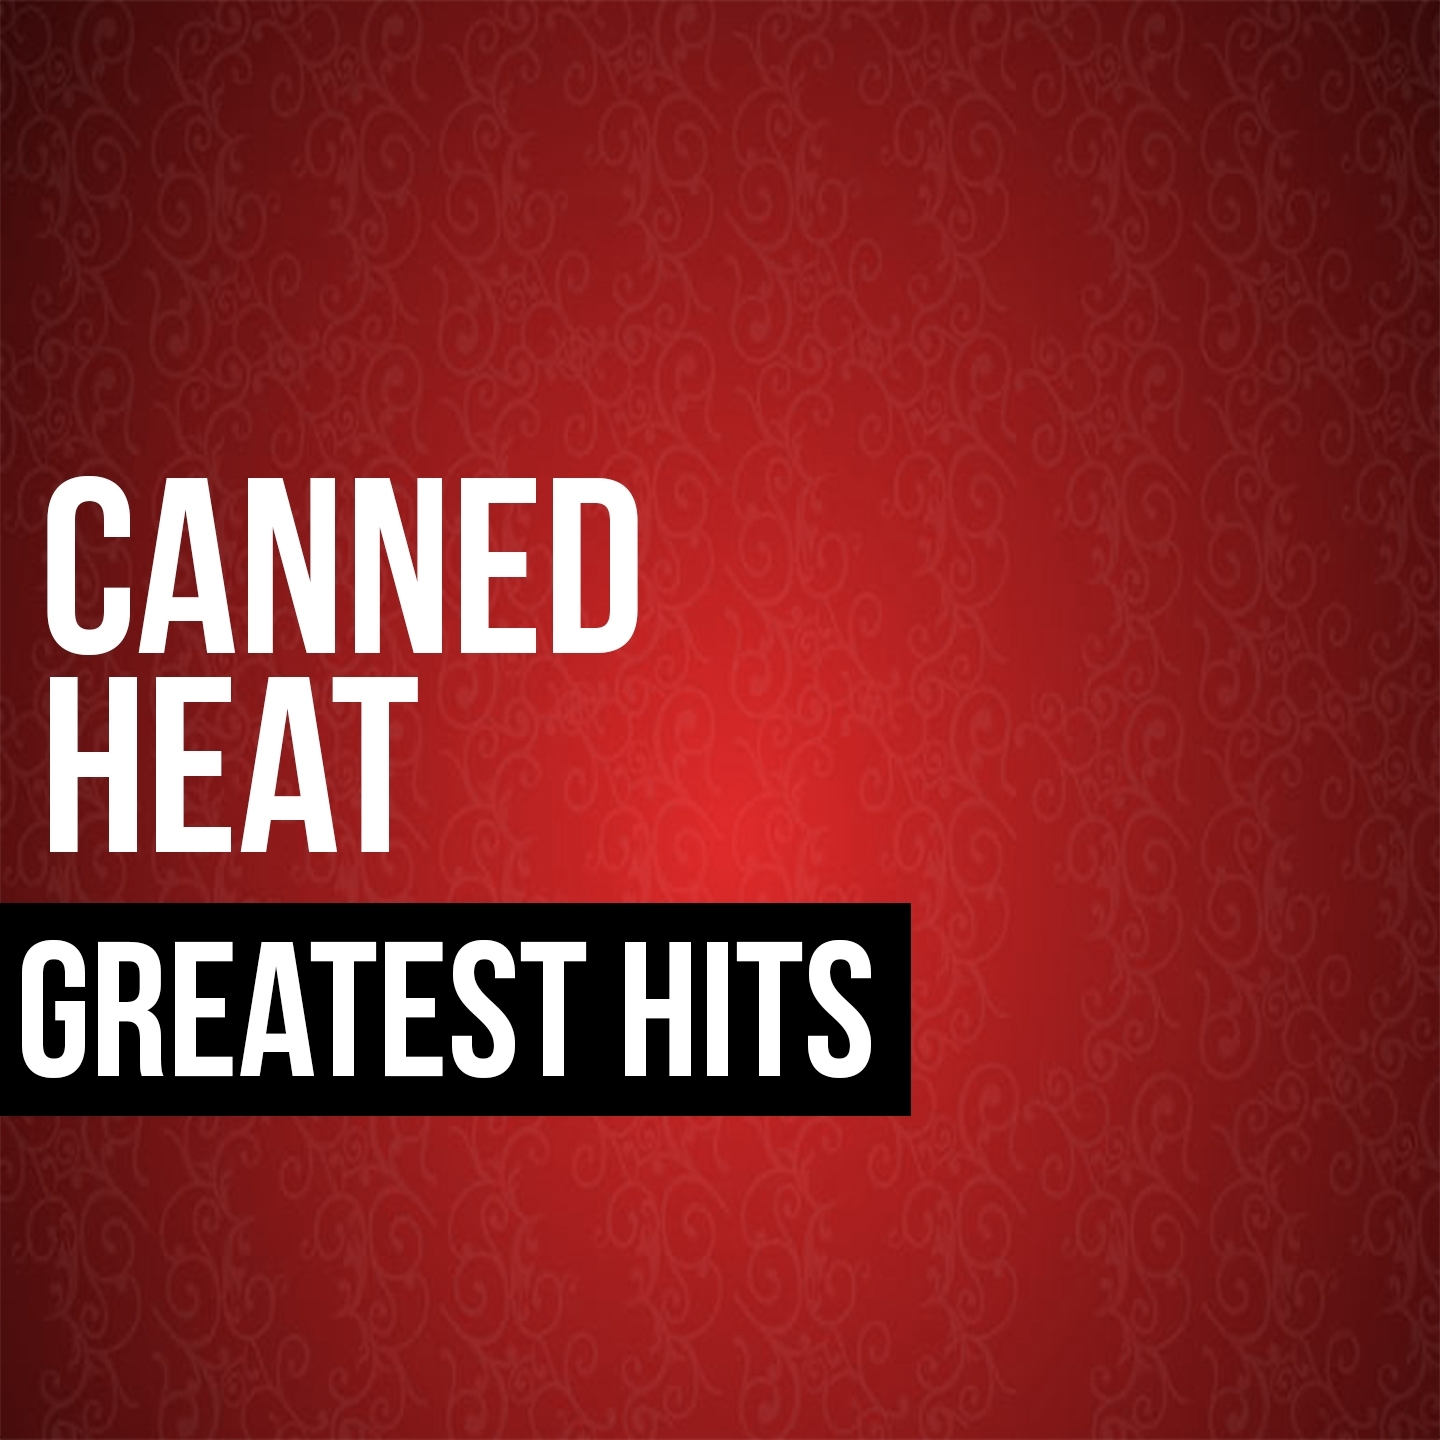 Canned Heat Greatest Hits